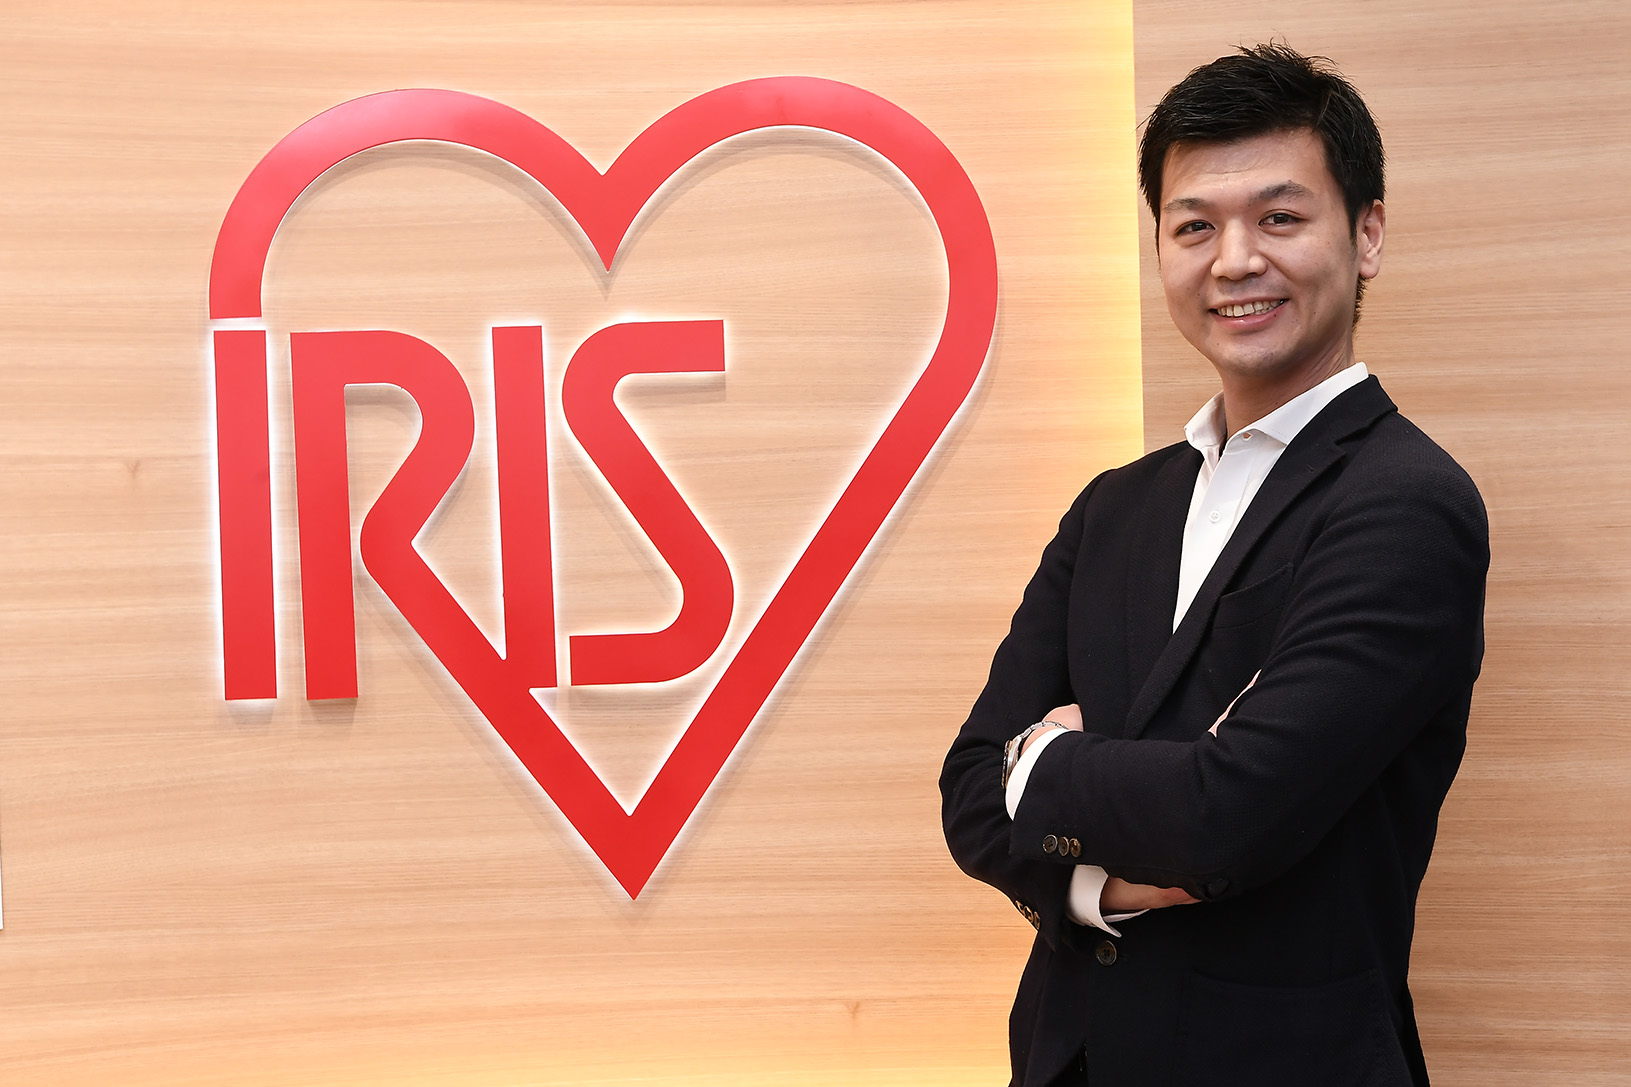 Renowned Japanese appliance brand IRIS OHYAMA gears up in Thai market,  opens flagship stores on Lazada